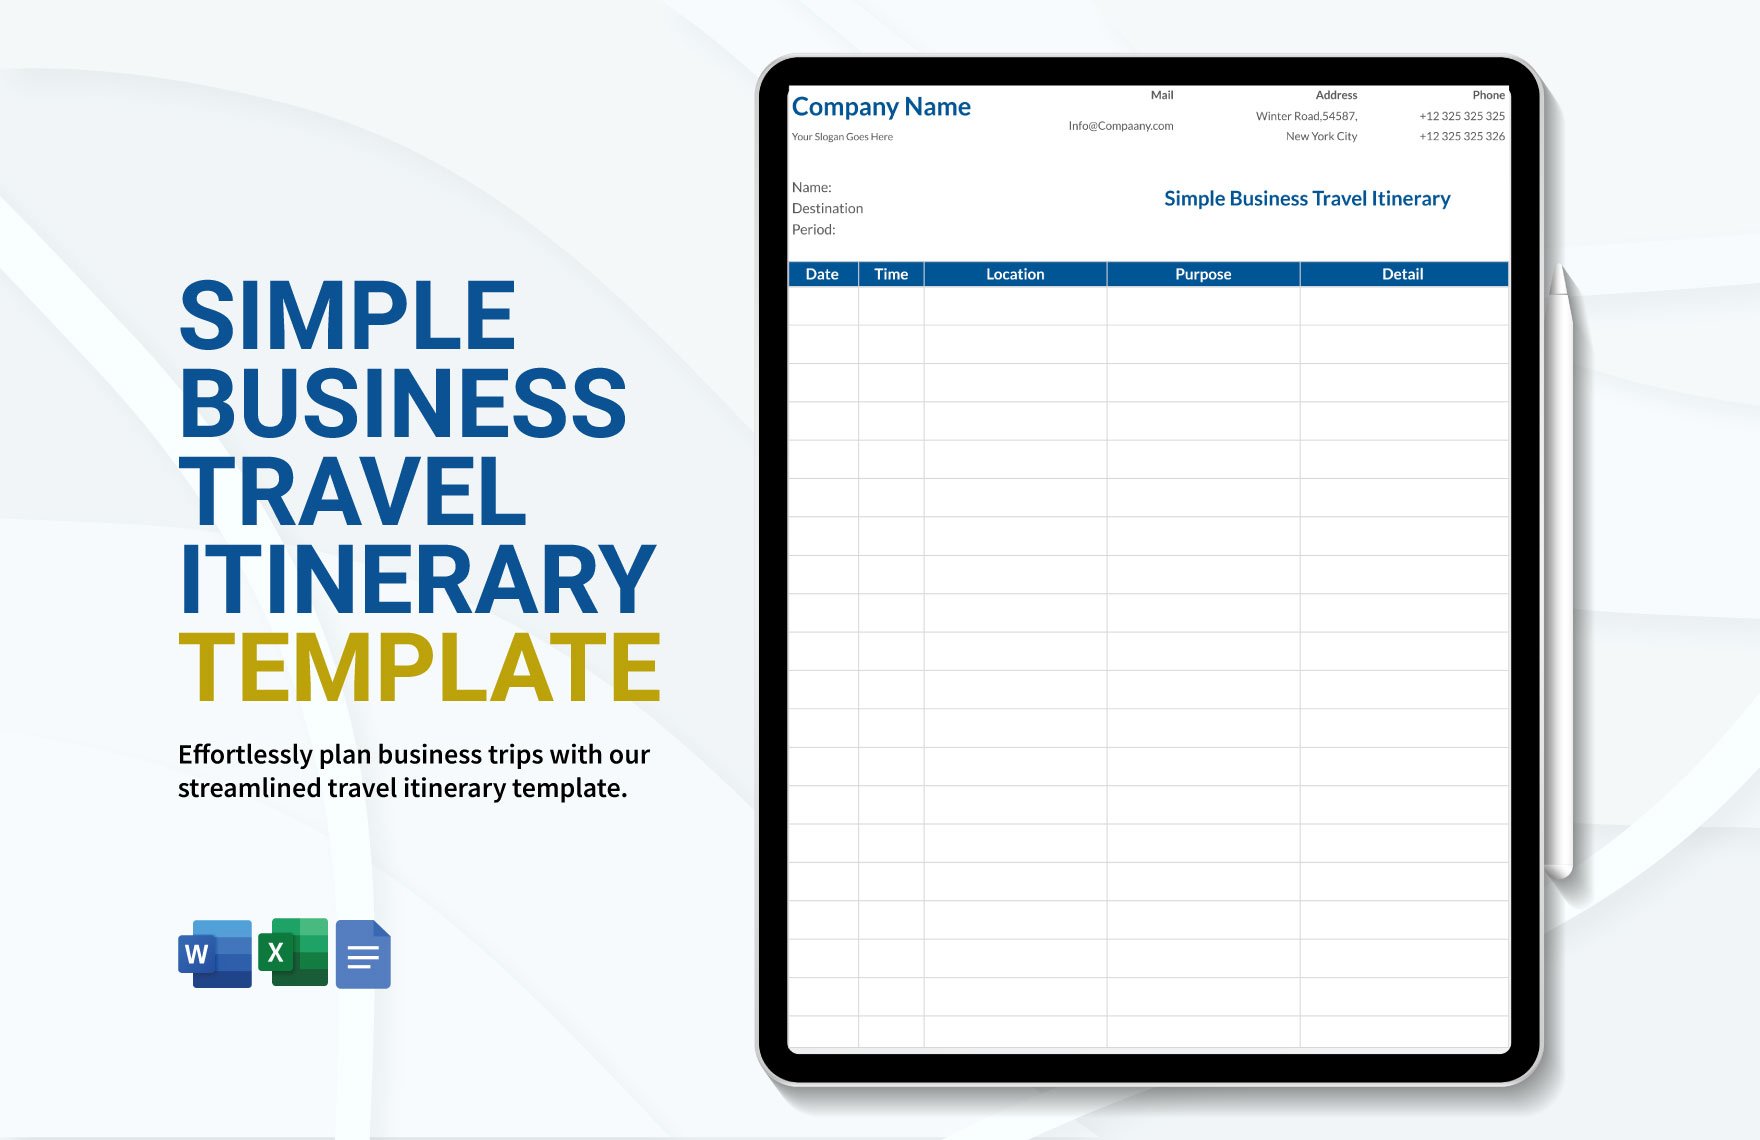 Simple Business Travel Itinerary Template in Word, Google Docs, Google Sheets